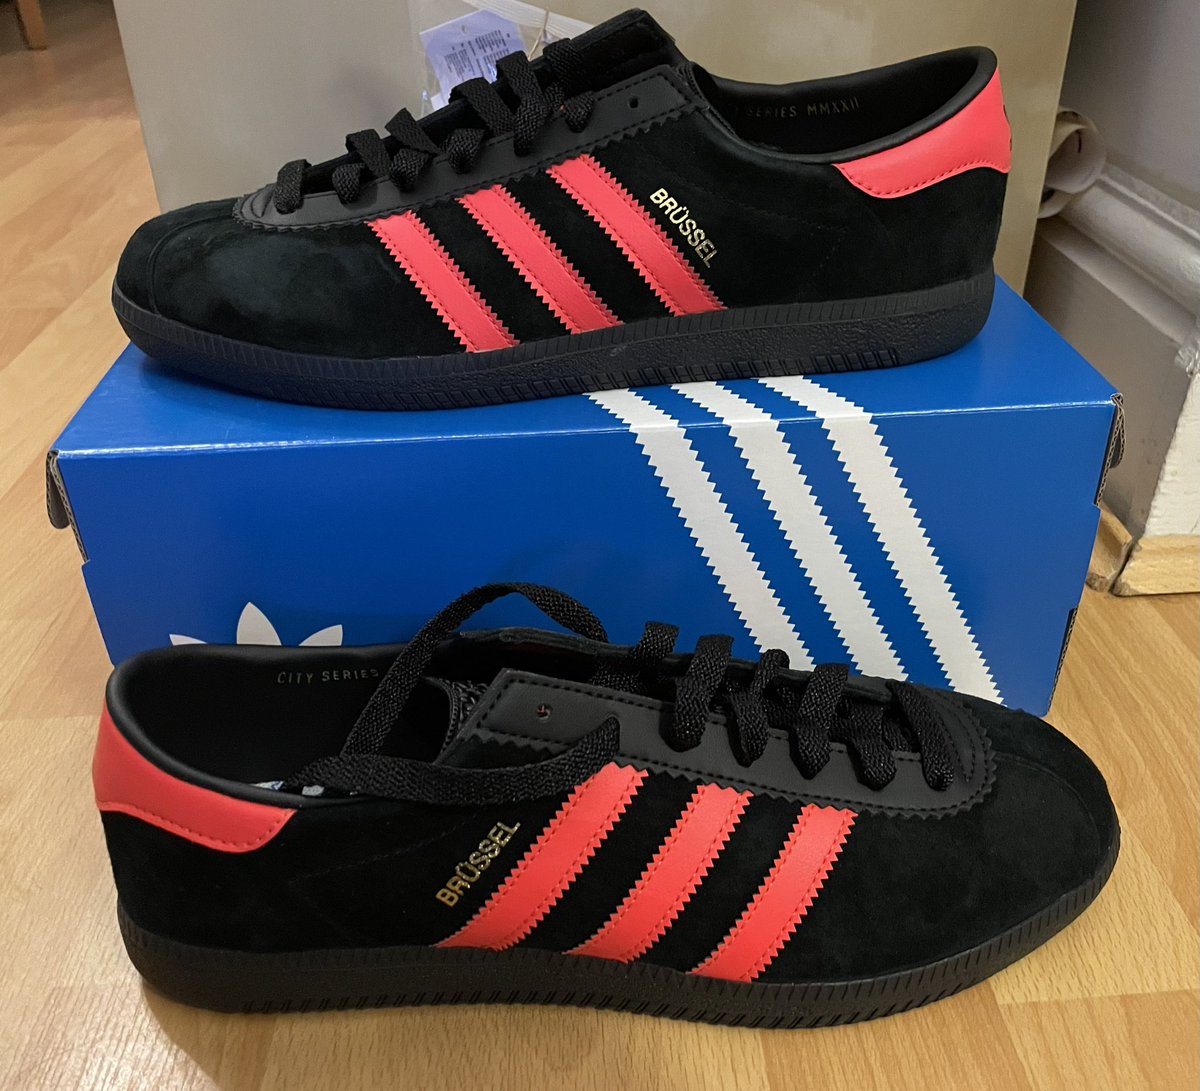 🚨FOR SALE 🚨 adidas Brussel Size 8 BNIBWT (fit size 8.5) £85 TYD Please add 4% if using G&S Retweets appreciated 👍 #shareyourstripes @TheCasualSniper @Mecloy3stripes @T_C__B_S_T #SPZL @RetroSolesUK @roundarway #adidas #spezial